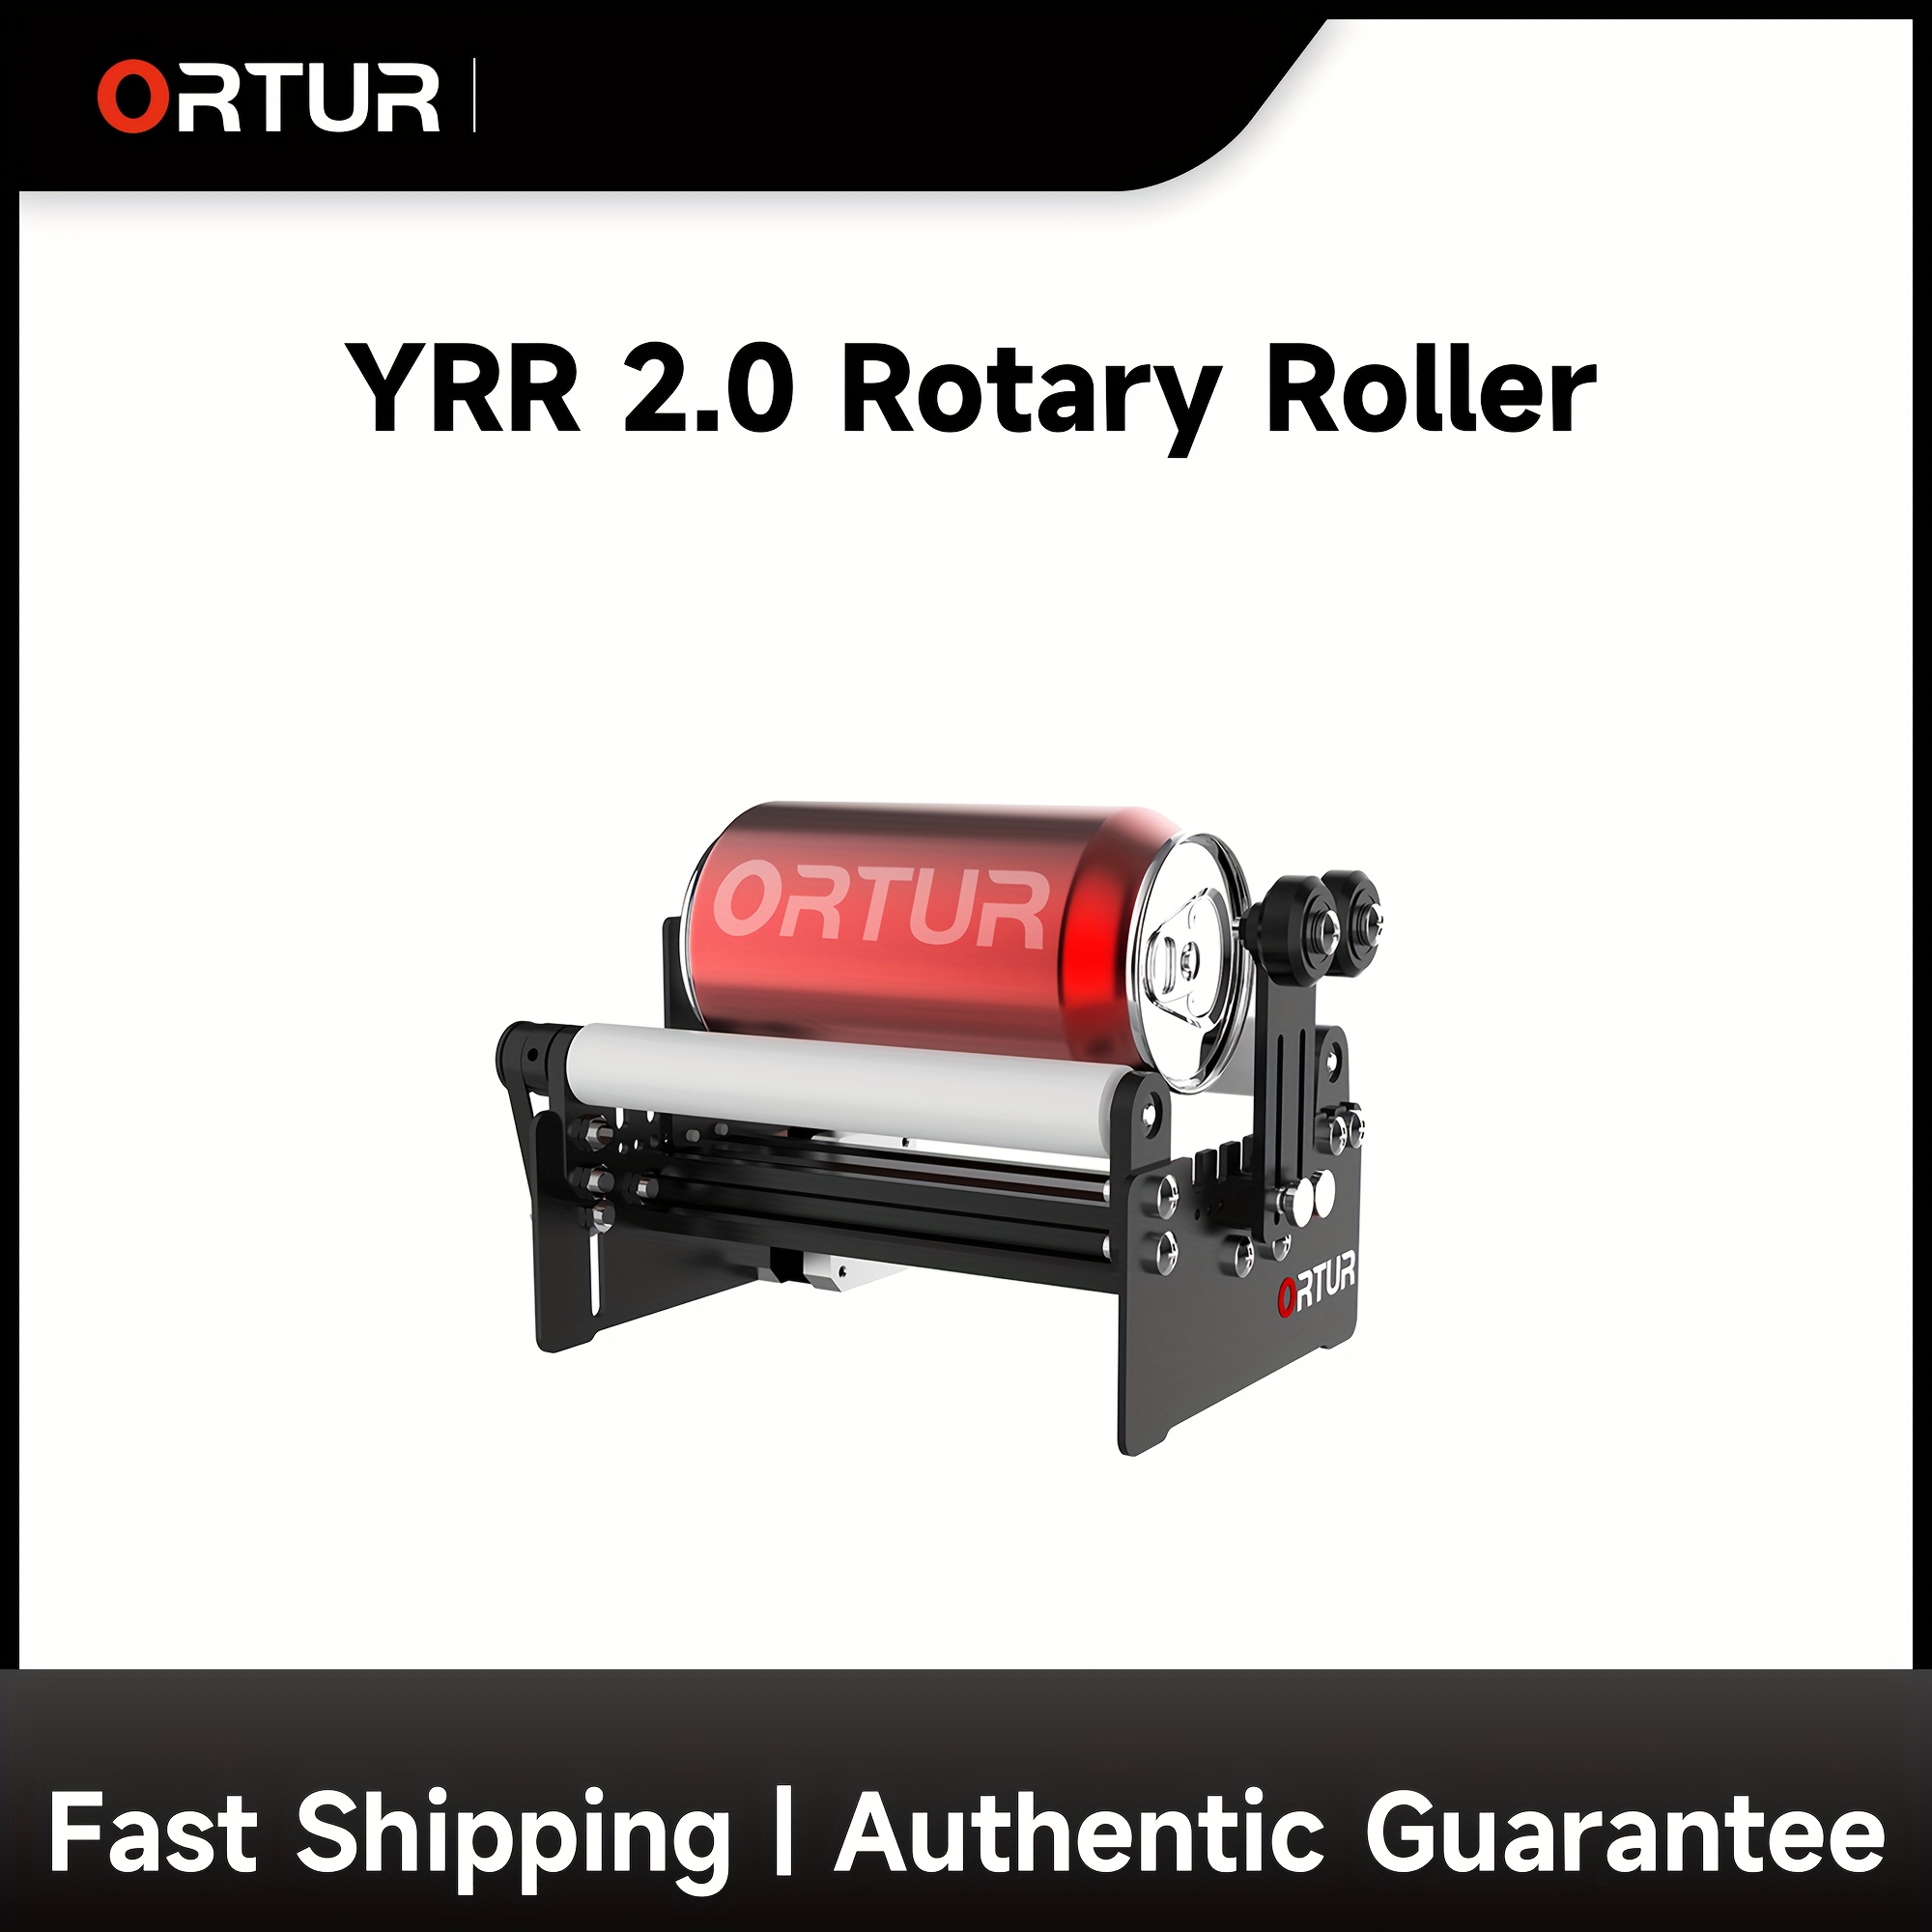 Ortur YRR 2.0, 360° Y Axis Rotary Roller With Separable Support Laser  Engraver Cutter For Column Cylinder Glass Bottles/cans/cups Engraving,  Compatibl